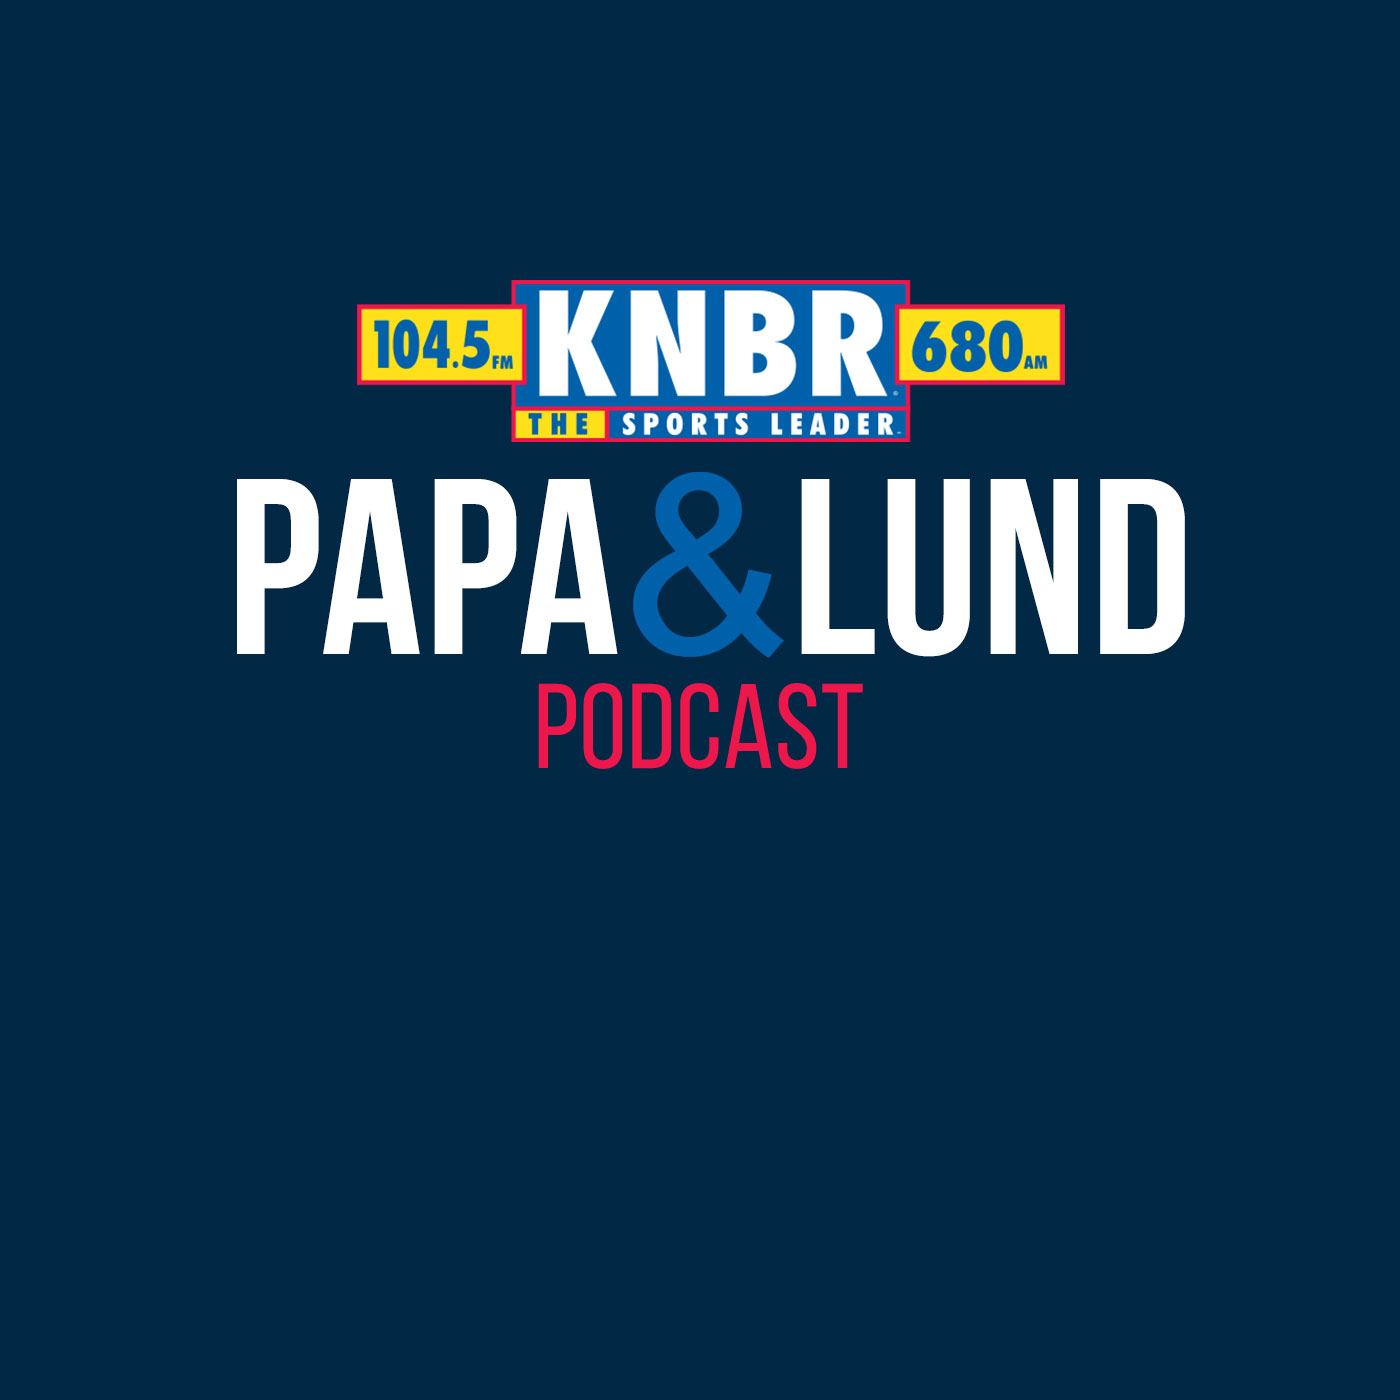 8-9 Jimmie Ward joins Papa & Lund to say teams shouldnt sleep on the secondary which he has named "Pick City" as well as says what his new nickname is